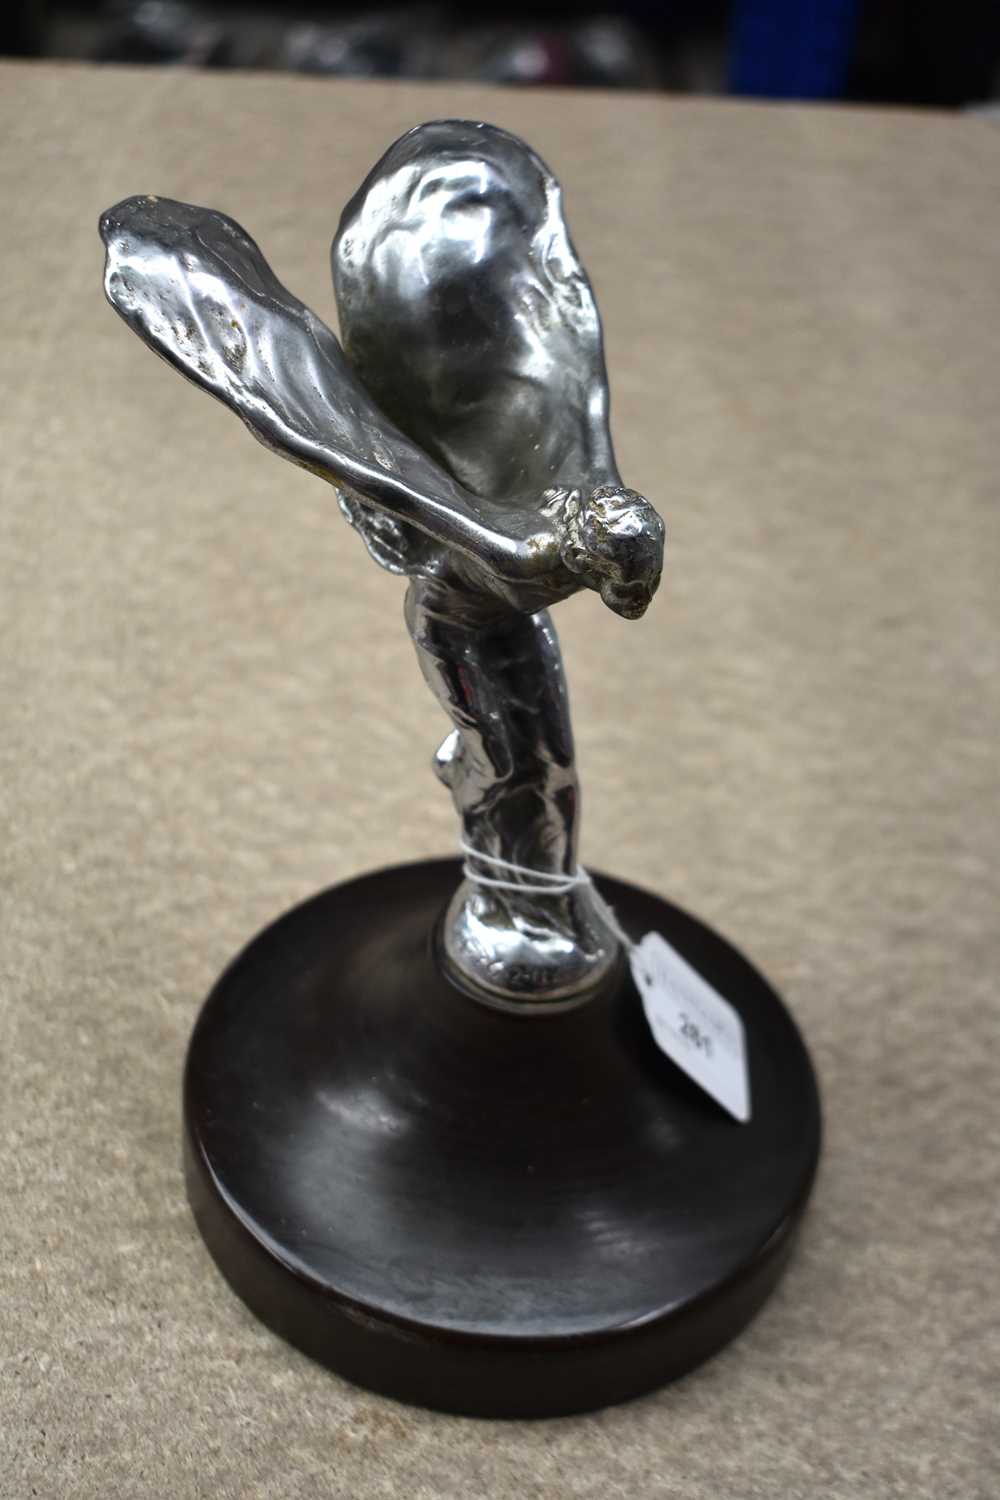 AN ANTIQUE CHARLES SYKES SPIRIT OF ECSTASY SILVER PLATED CAR MASCOT. 23 cm high. - Image 9 of 15